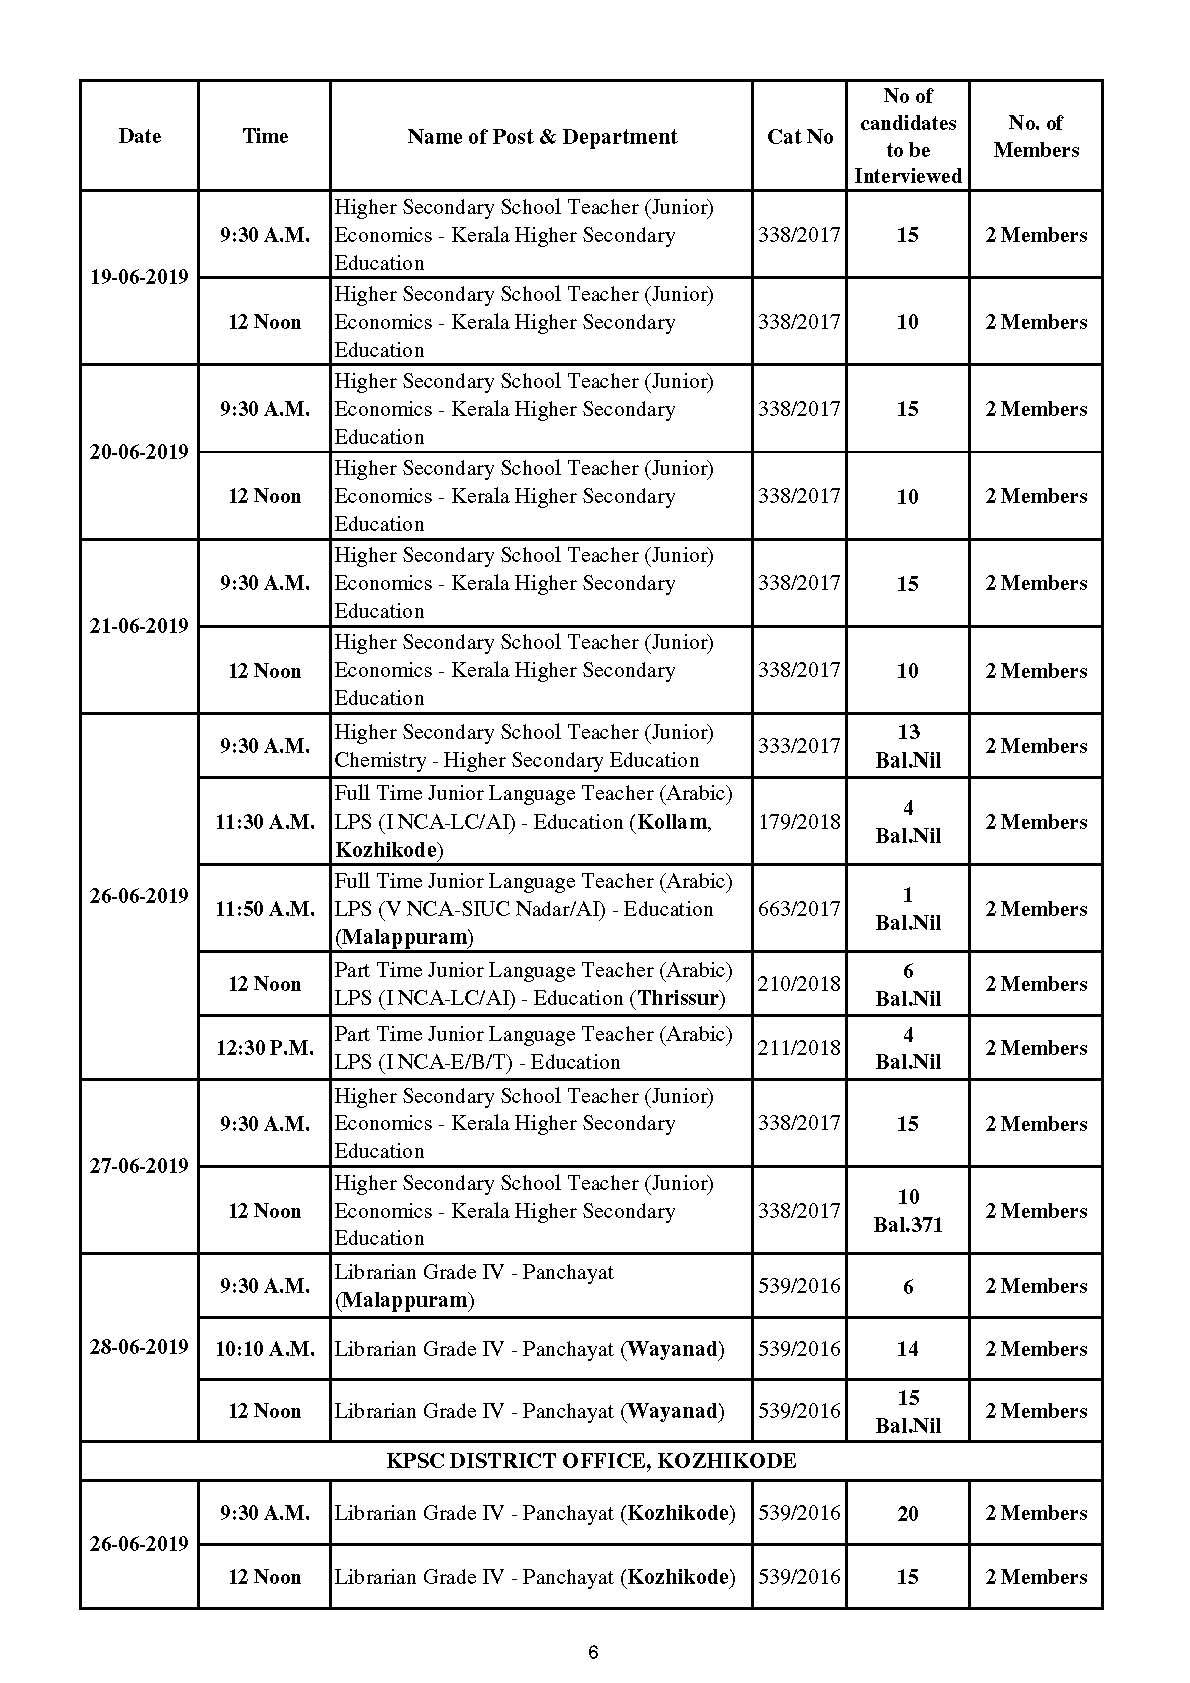 KPSC Interview Programme For The Month Of June 2019 - Notification Image 6